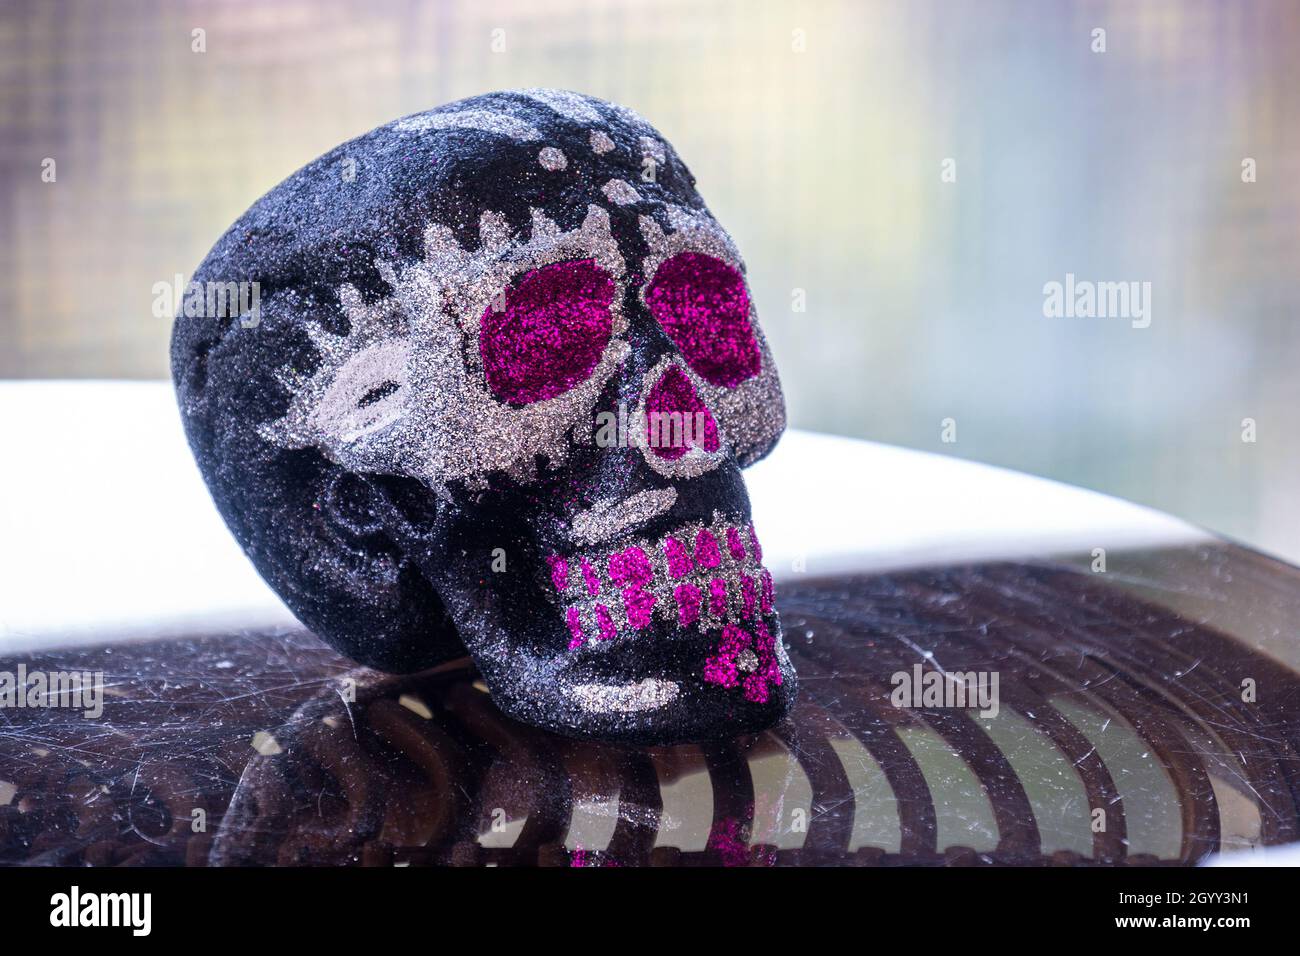 mexican pink or purple skull Day of the Dead calavera sugar skull background Stock Photo